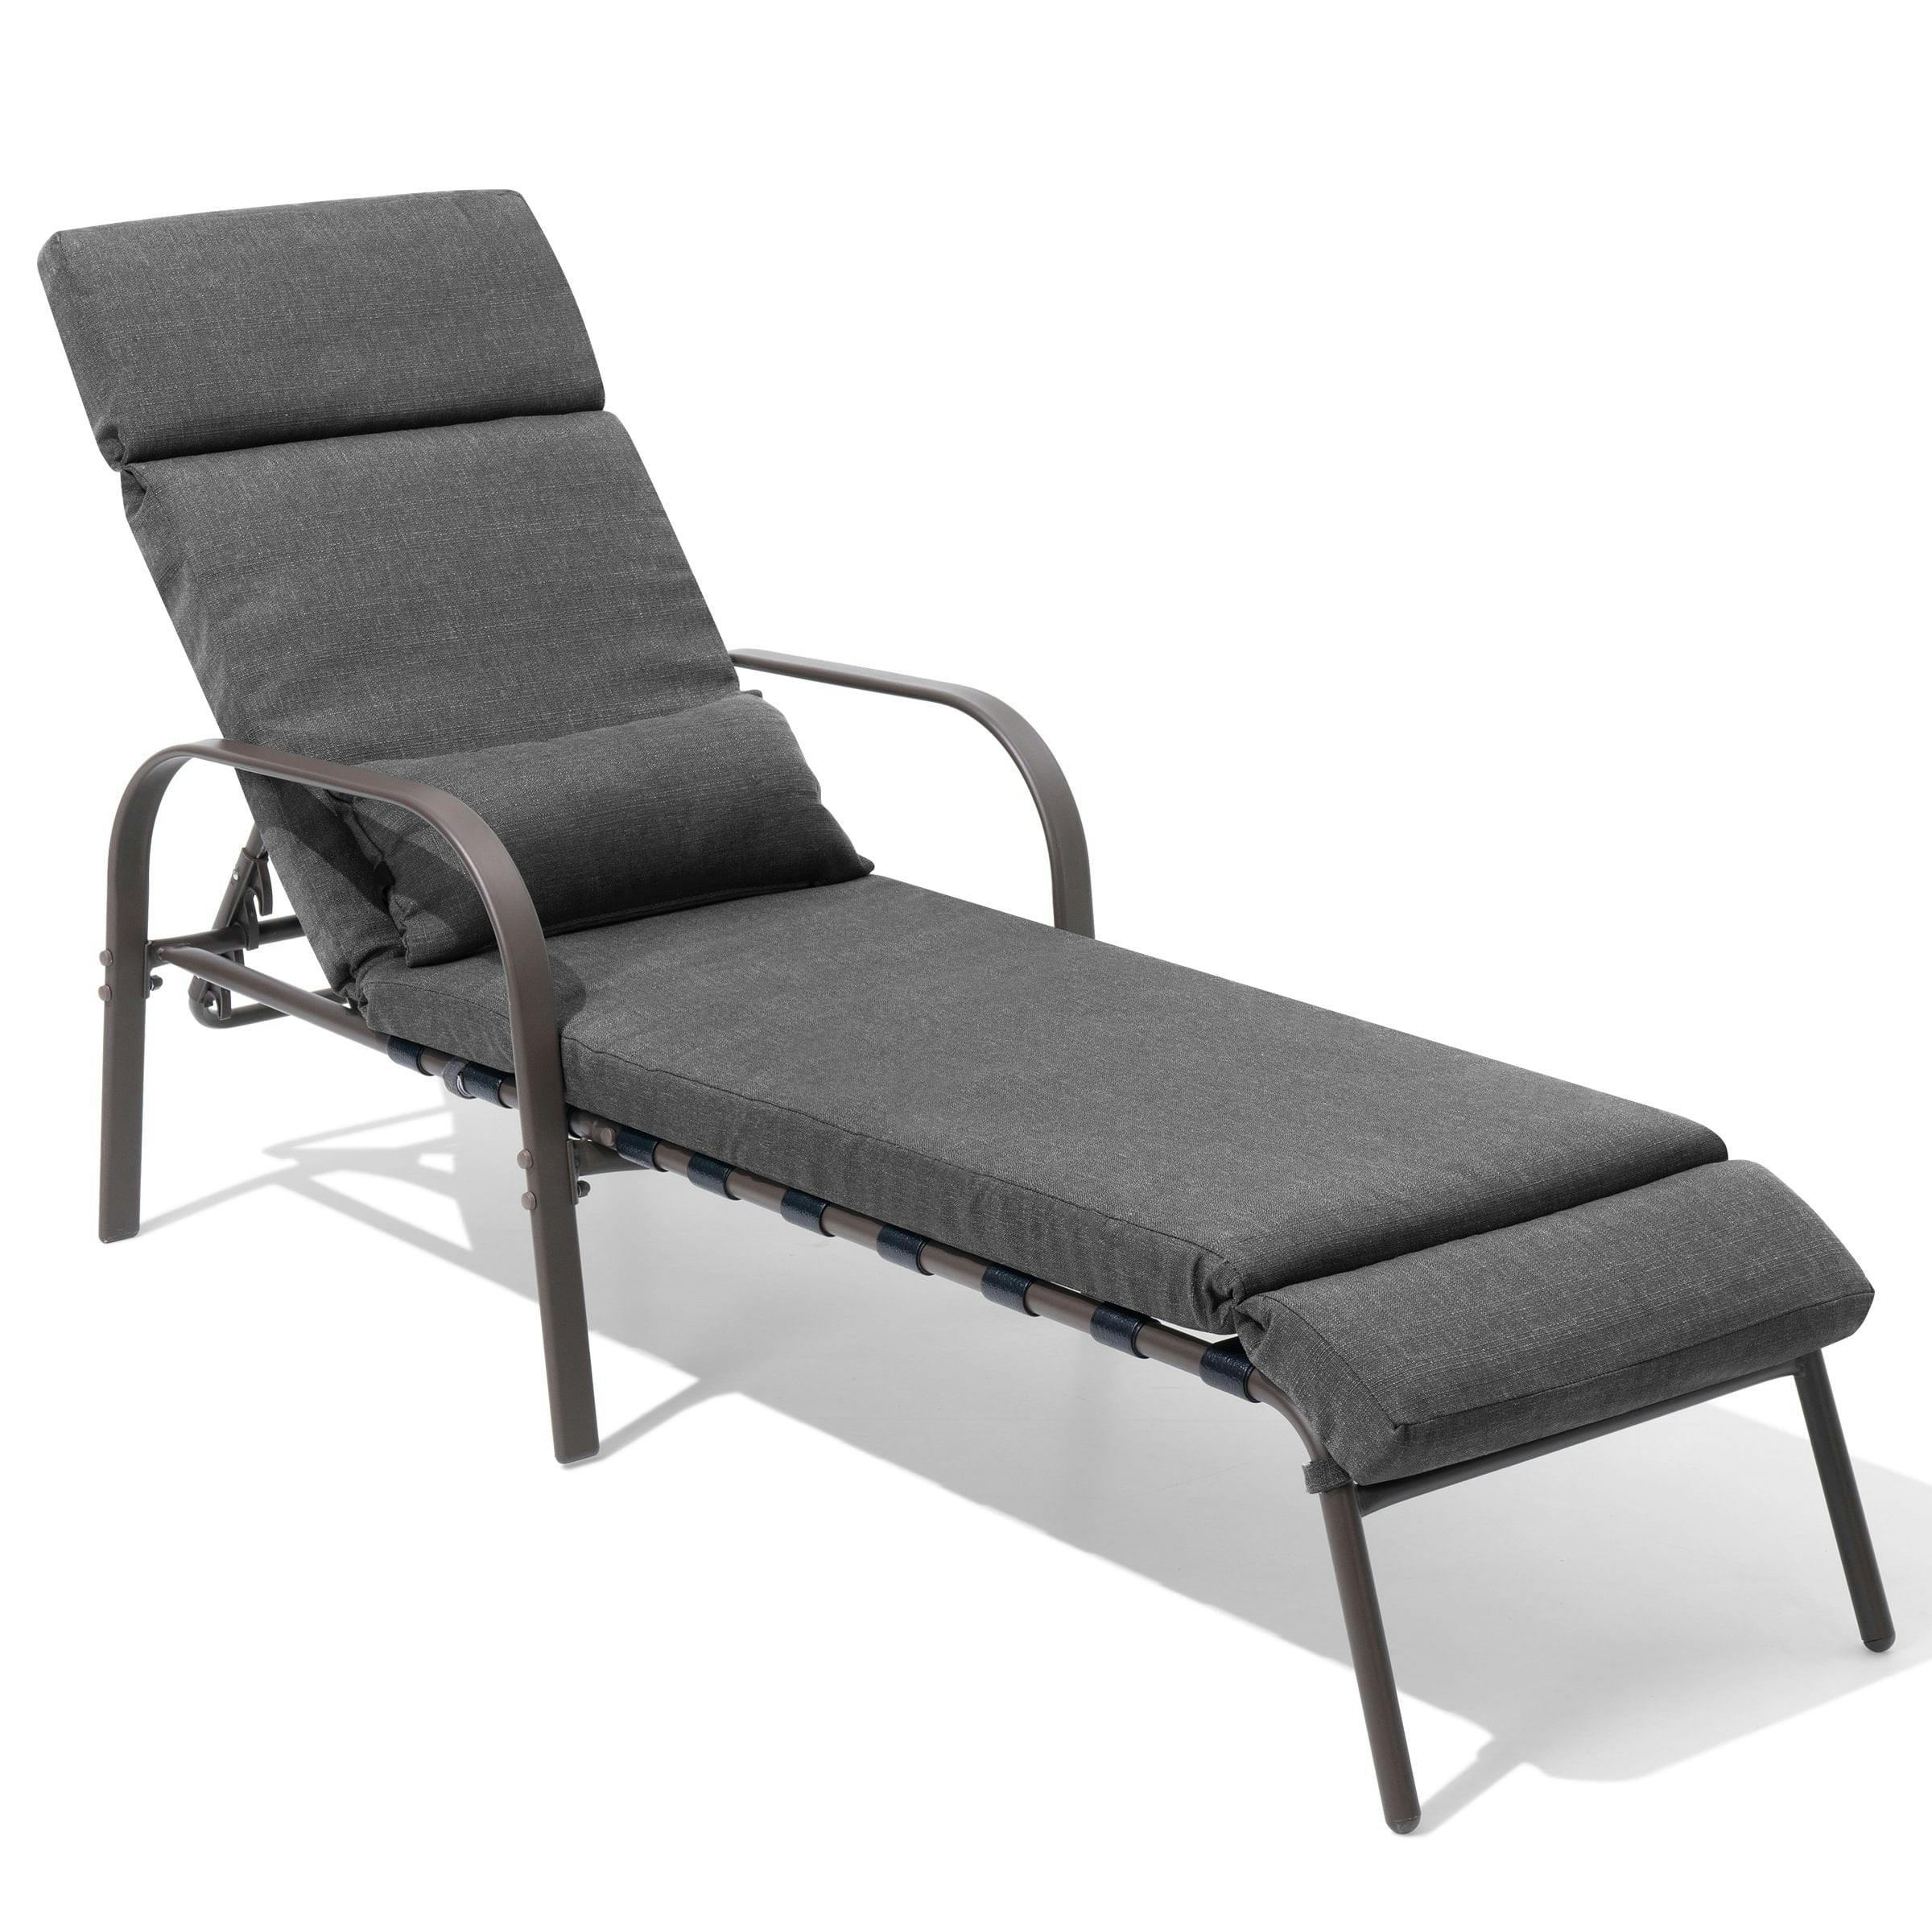 Coastal Breeze Dark Gray Adjustable Outdoor Chaise Lounge with Cushion